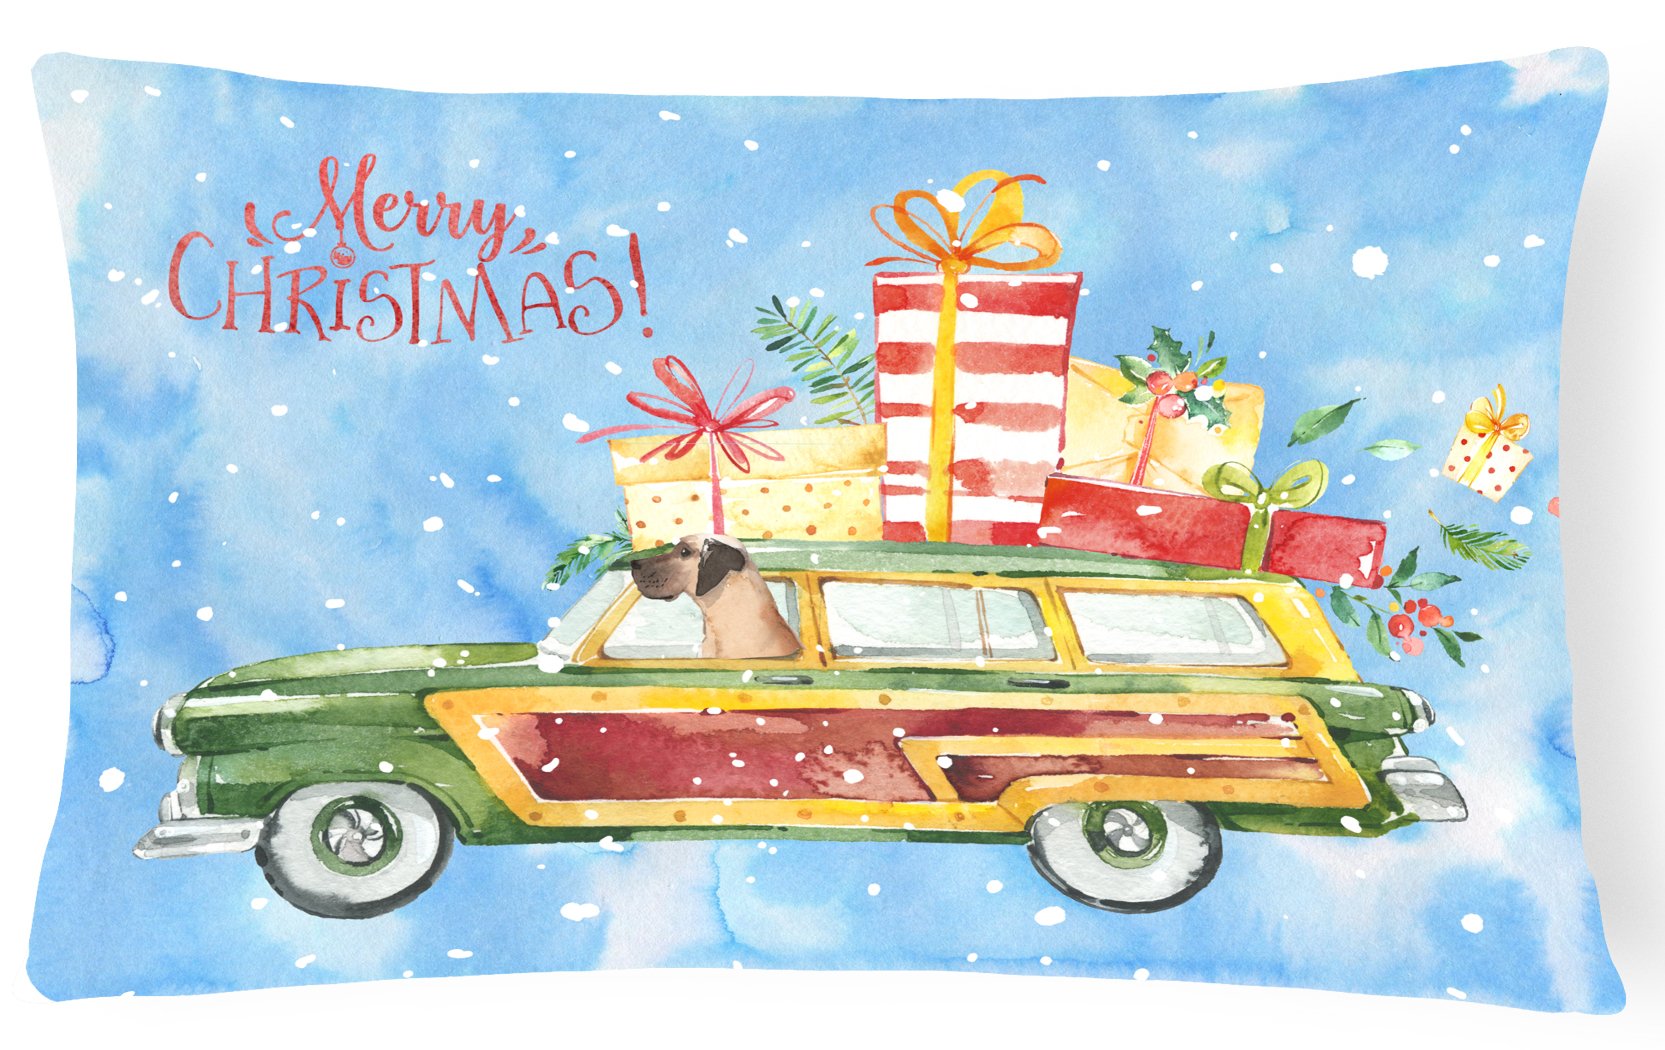 Merry Christmas Great Dane Canvas Fabric Decorative Pillow CK2456PW1216 by Caroline's Treasures